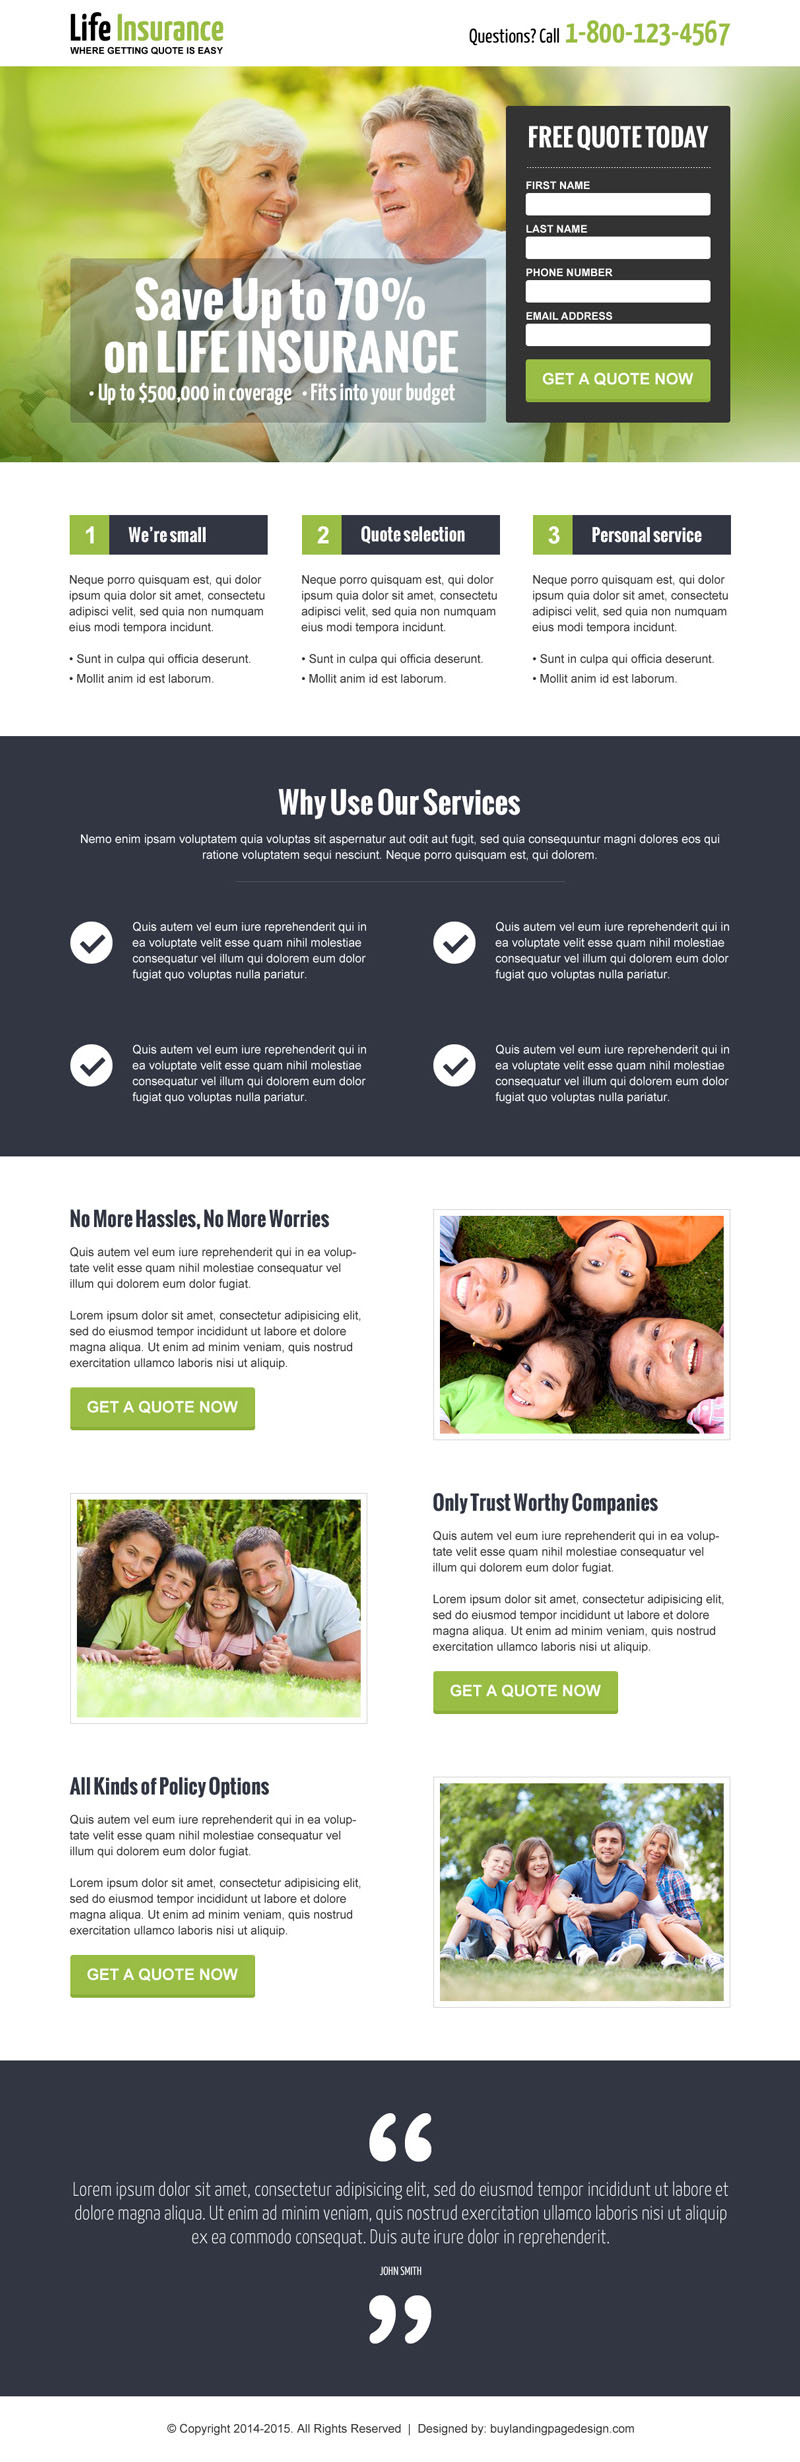 save-money-on-life-insurance-quote-lead-capture-landing-page-design-template-012